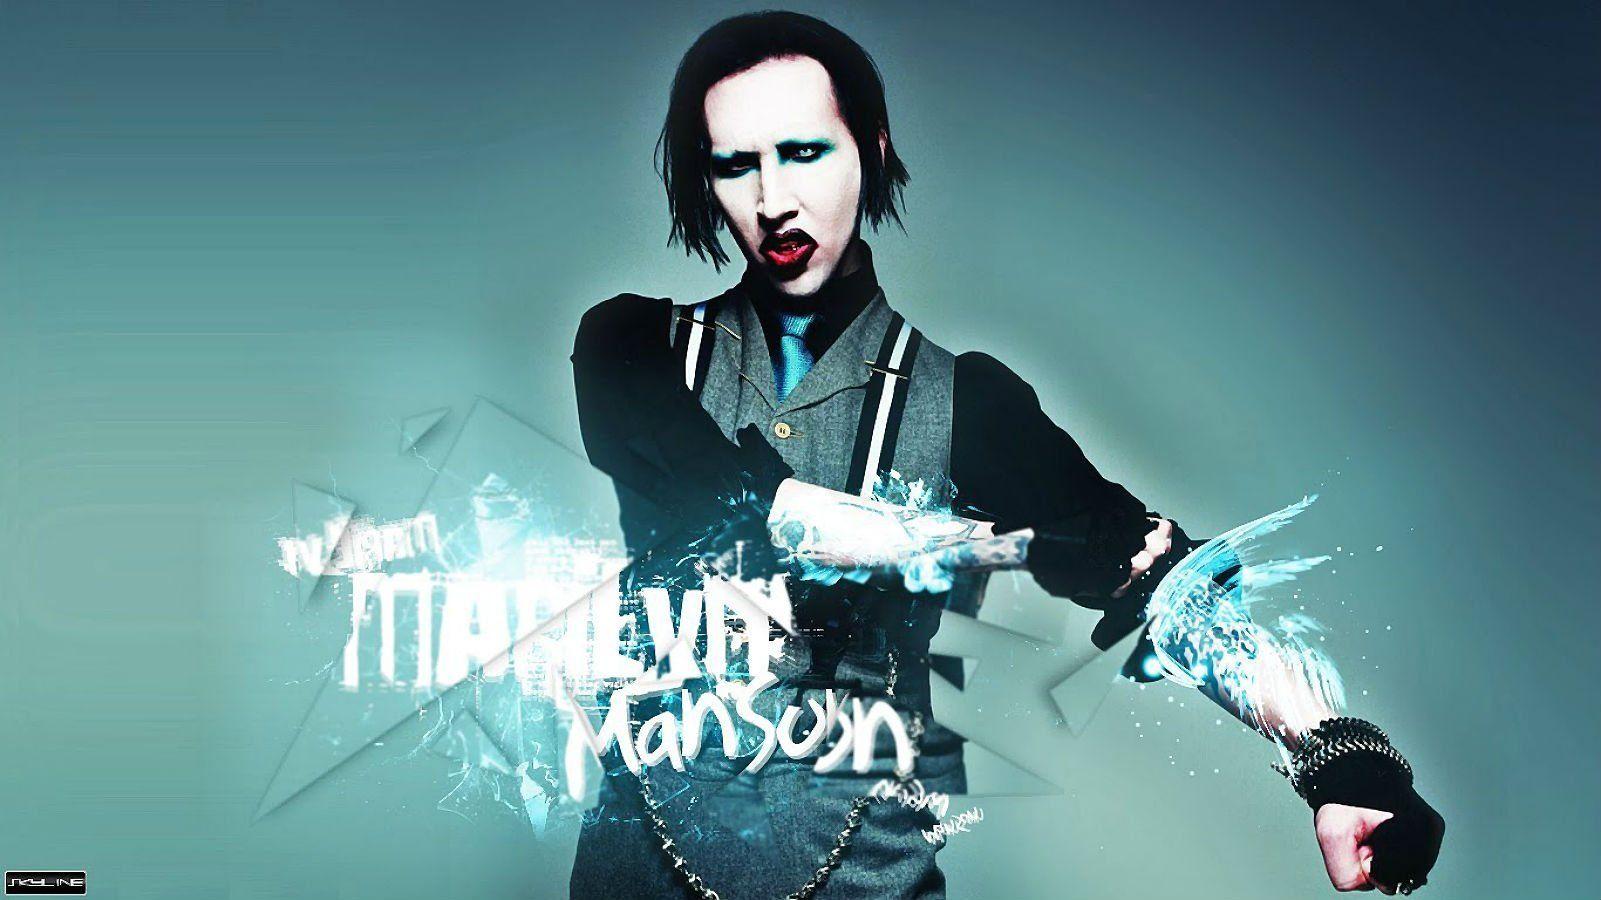 Marilyn Manson Wallpaper and Background Imagex900